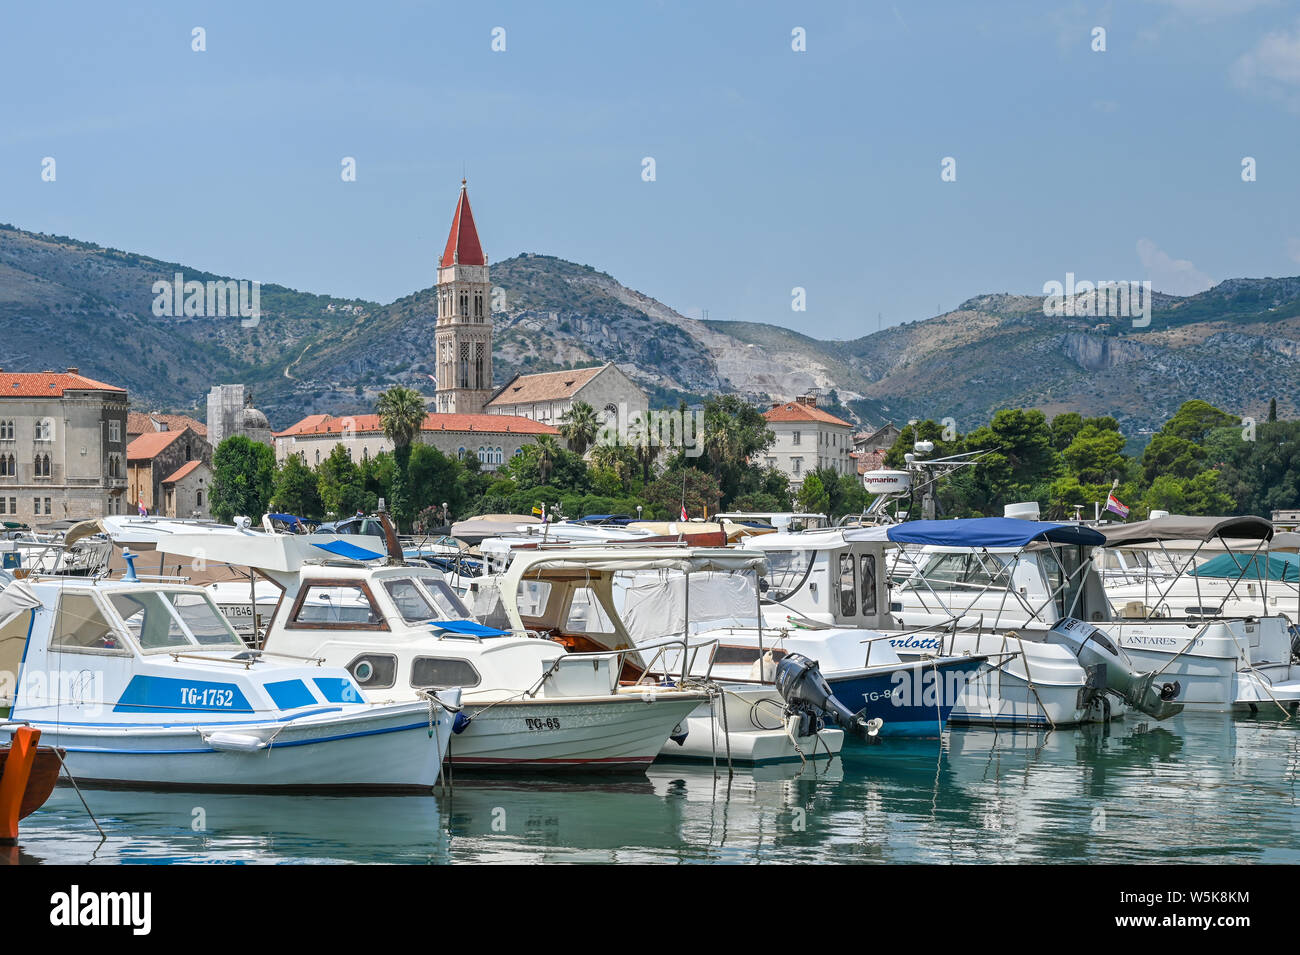 The old city of Trogir. This historic town is located in Dalmatia on the Adriatic coast close to Split. Stock Photo